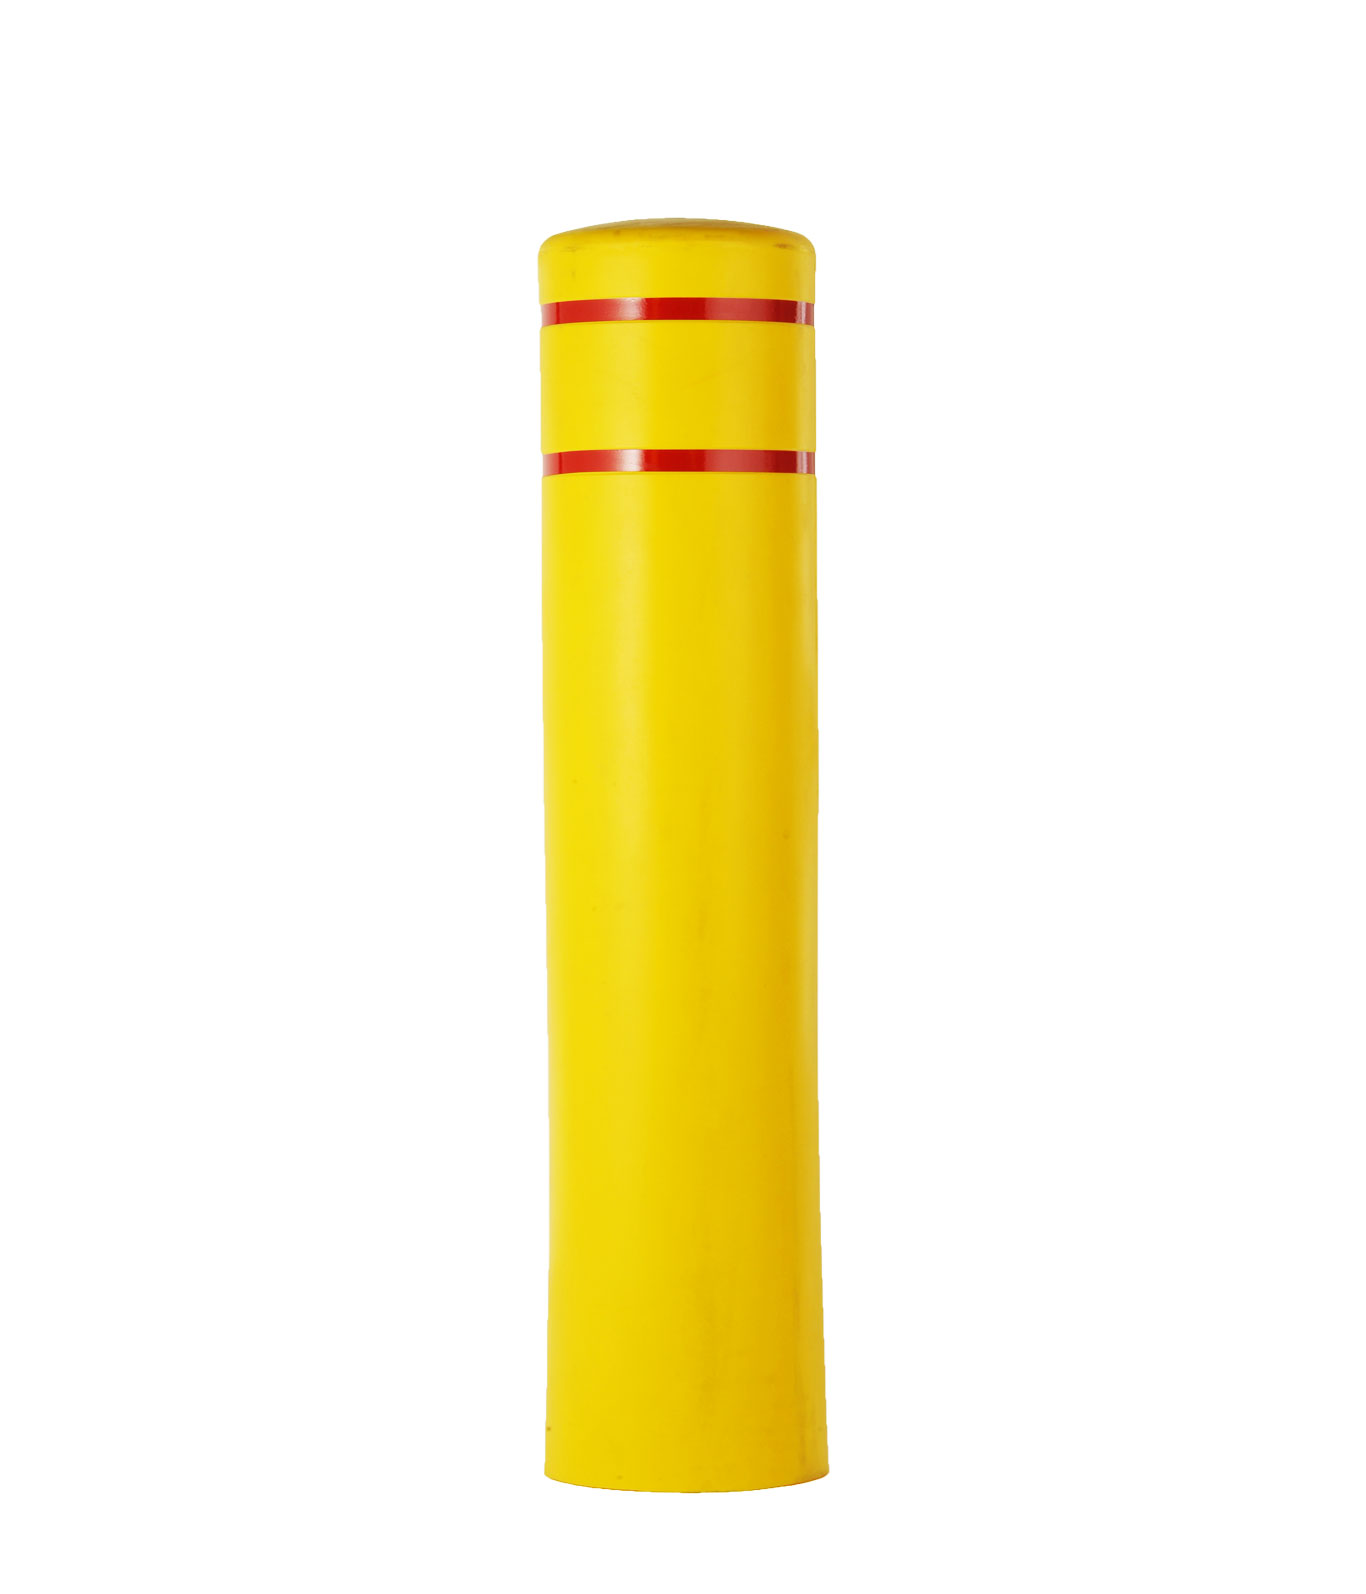 Yellow R-7155 plastic bollard cover with red reflective strips